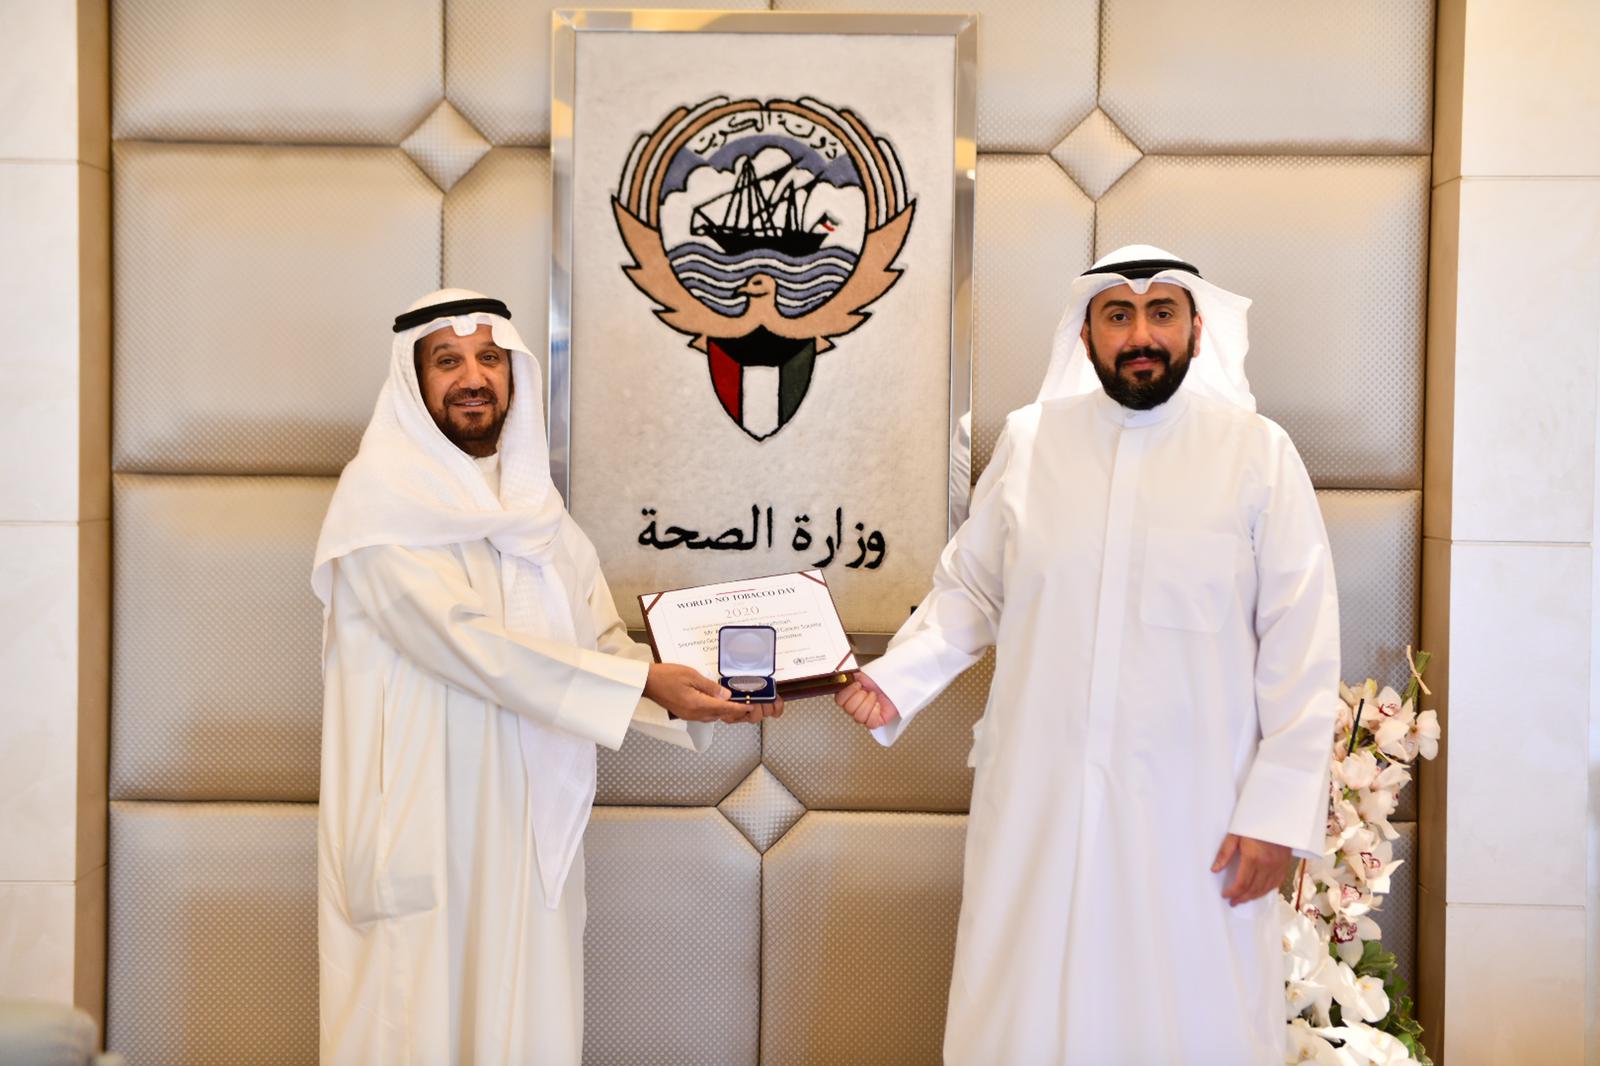 Health Minister Sheikh Dr. Bassel Al-Sabah honoring Secretary General of Kuwait Society for Preventing Smoking and Cancer